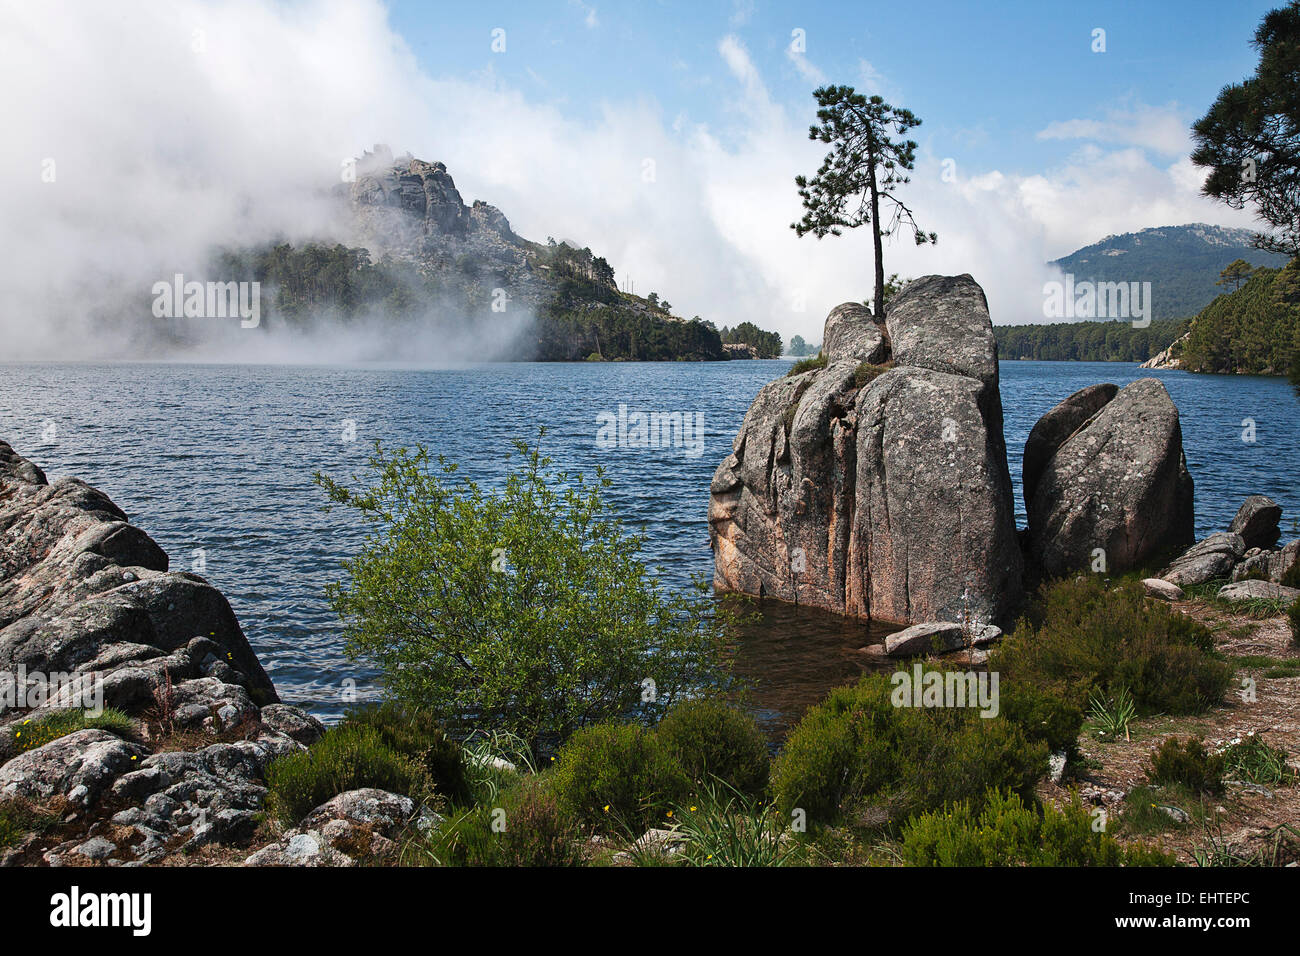 A lake in central Corsica near the mountain village of Zonza becomes a dramatic scene with incoming weather and clouds. Stock Photo